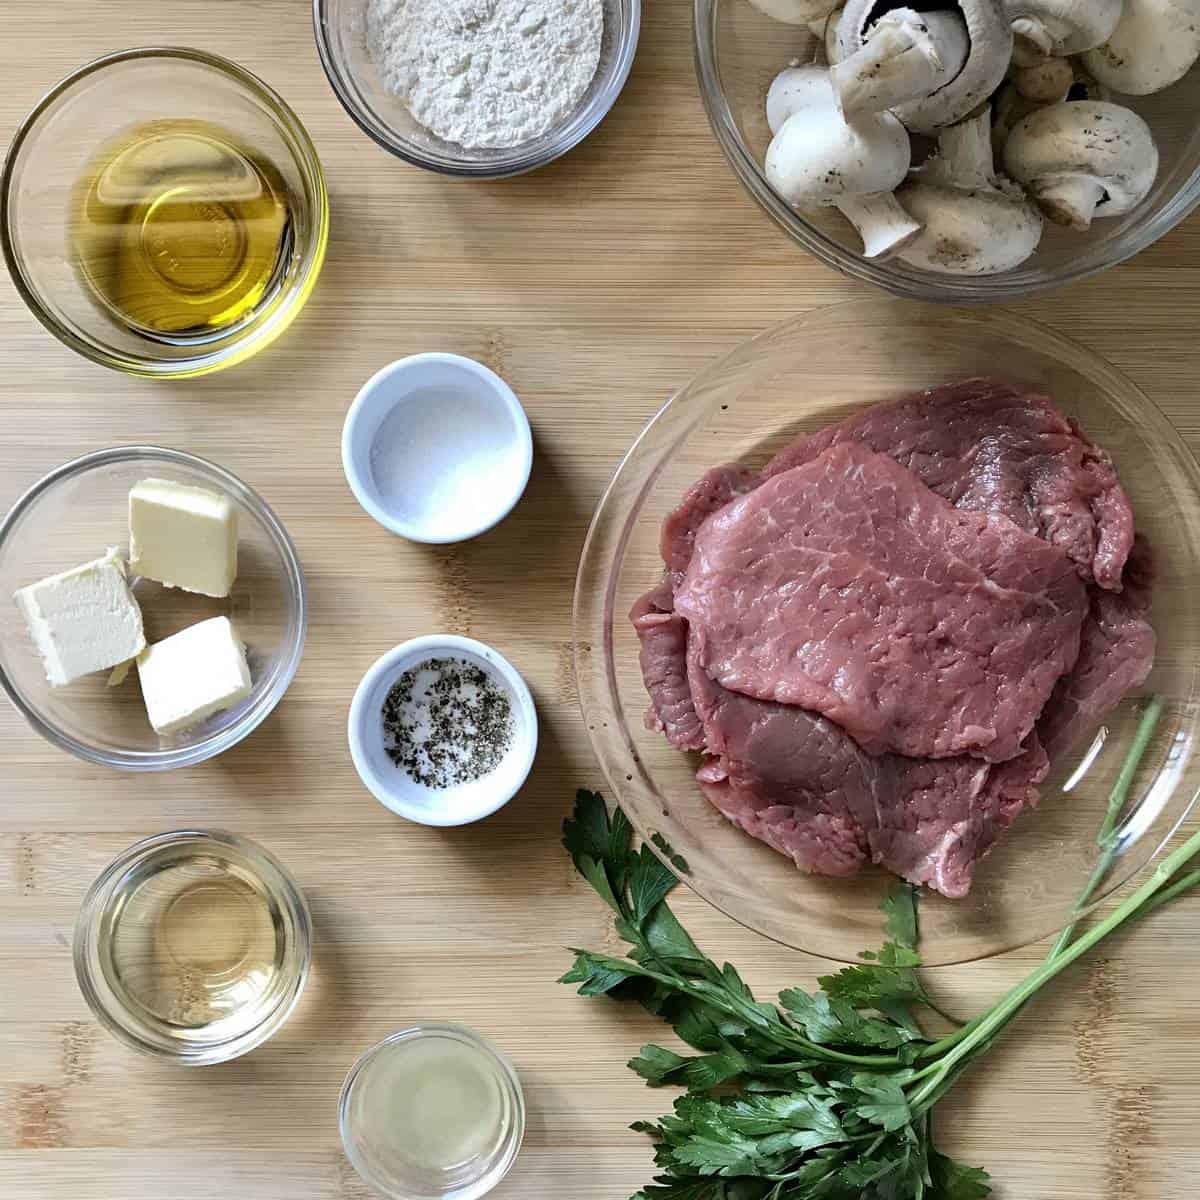 Ingredients required to make a scaloppini of veal.